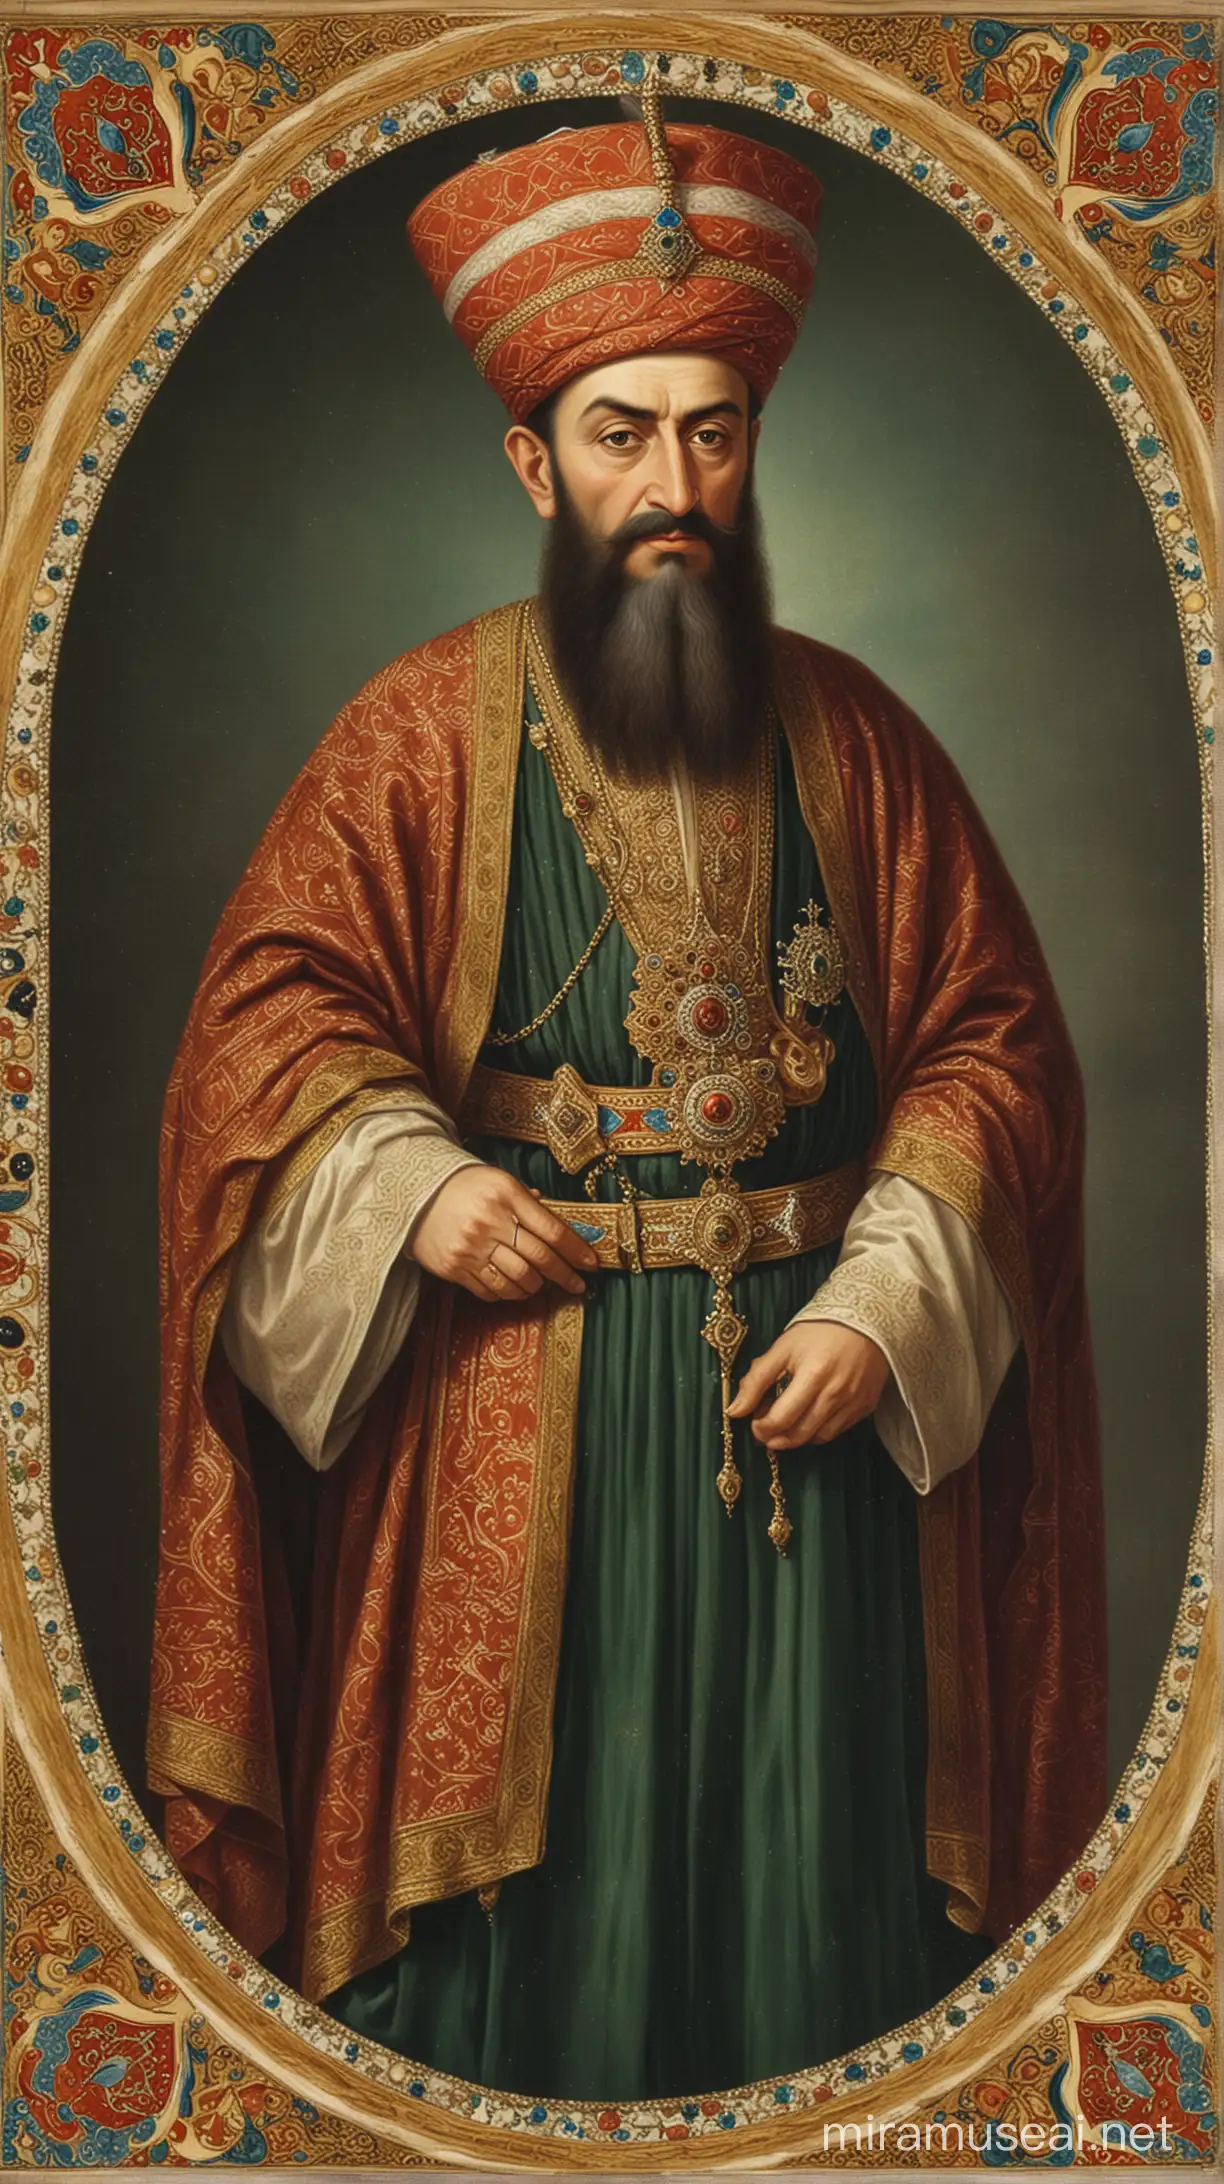 A portrait of the statesman depicted as the grand vizier in an Ottoman miniature from the era of Murad IV.